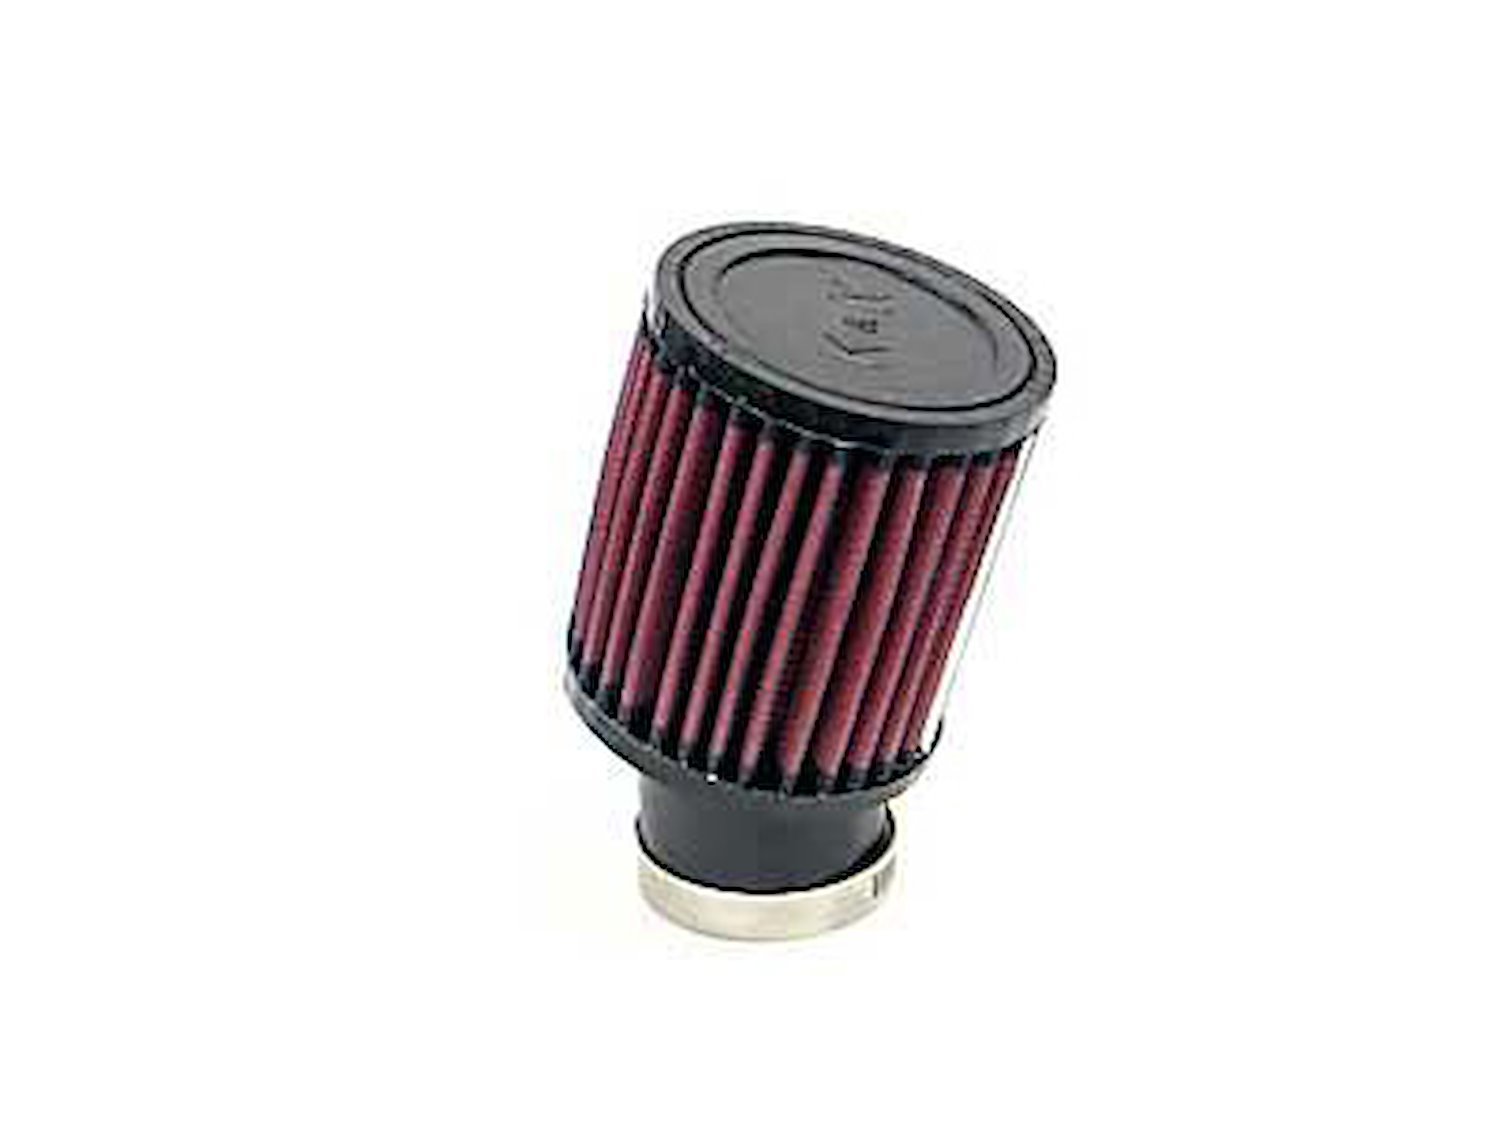 Round Straight Air Filter Flange Dia. (F): 1.938" (49 mm)